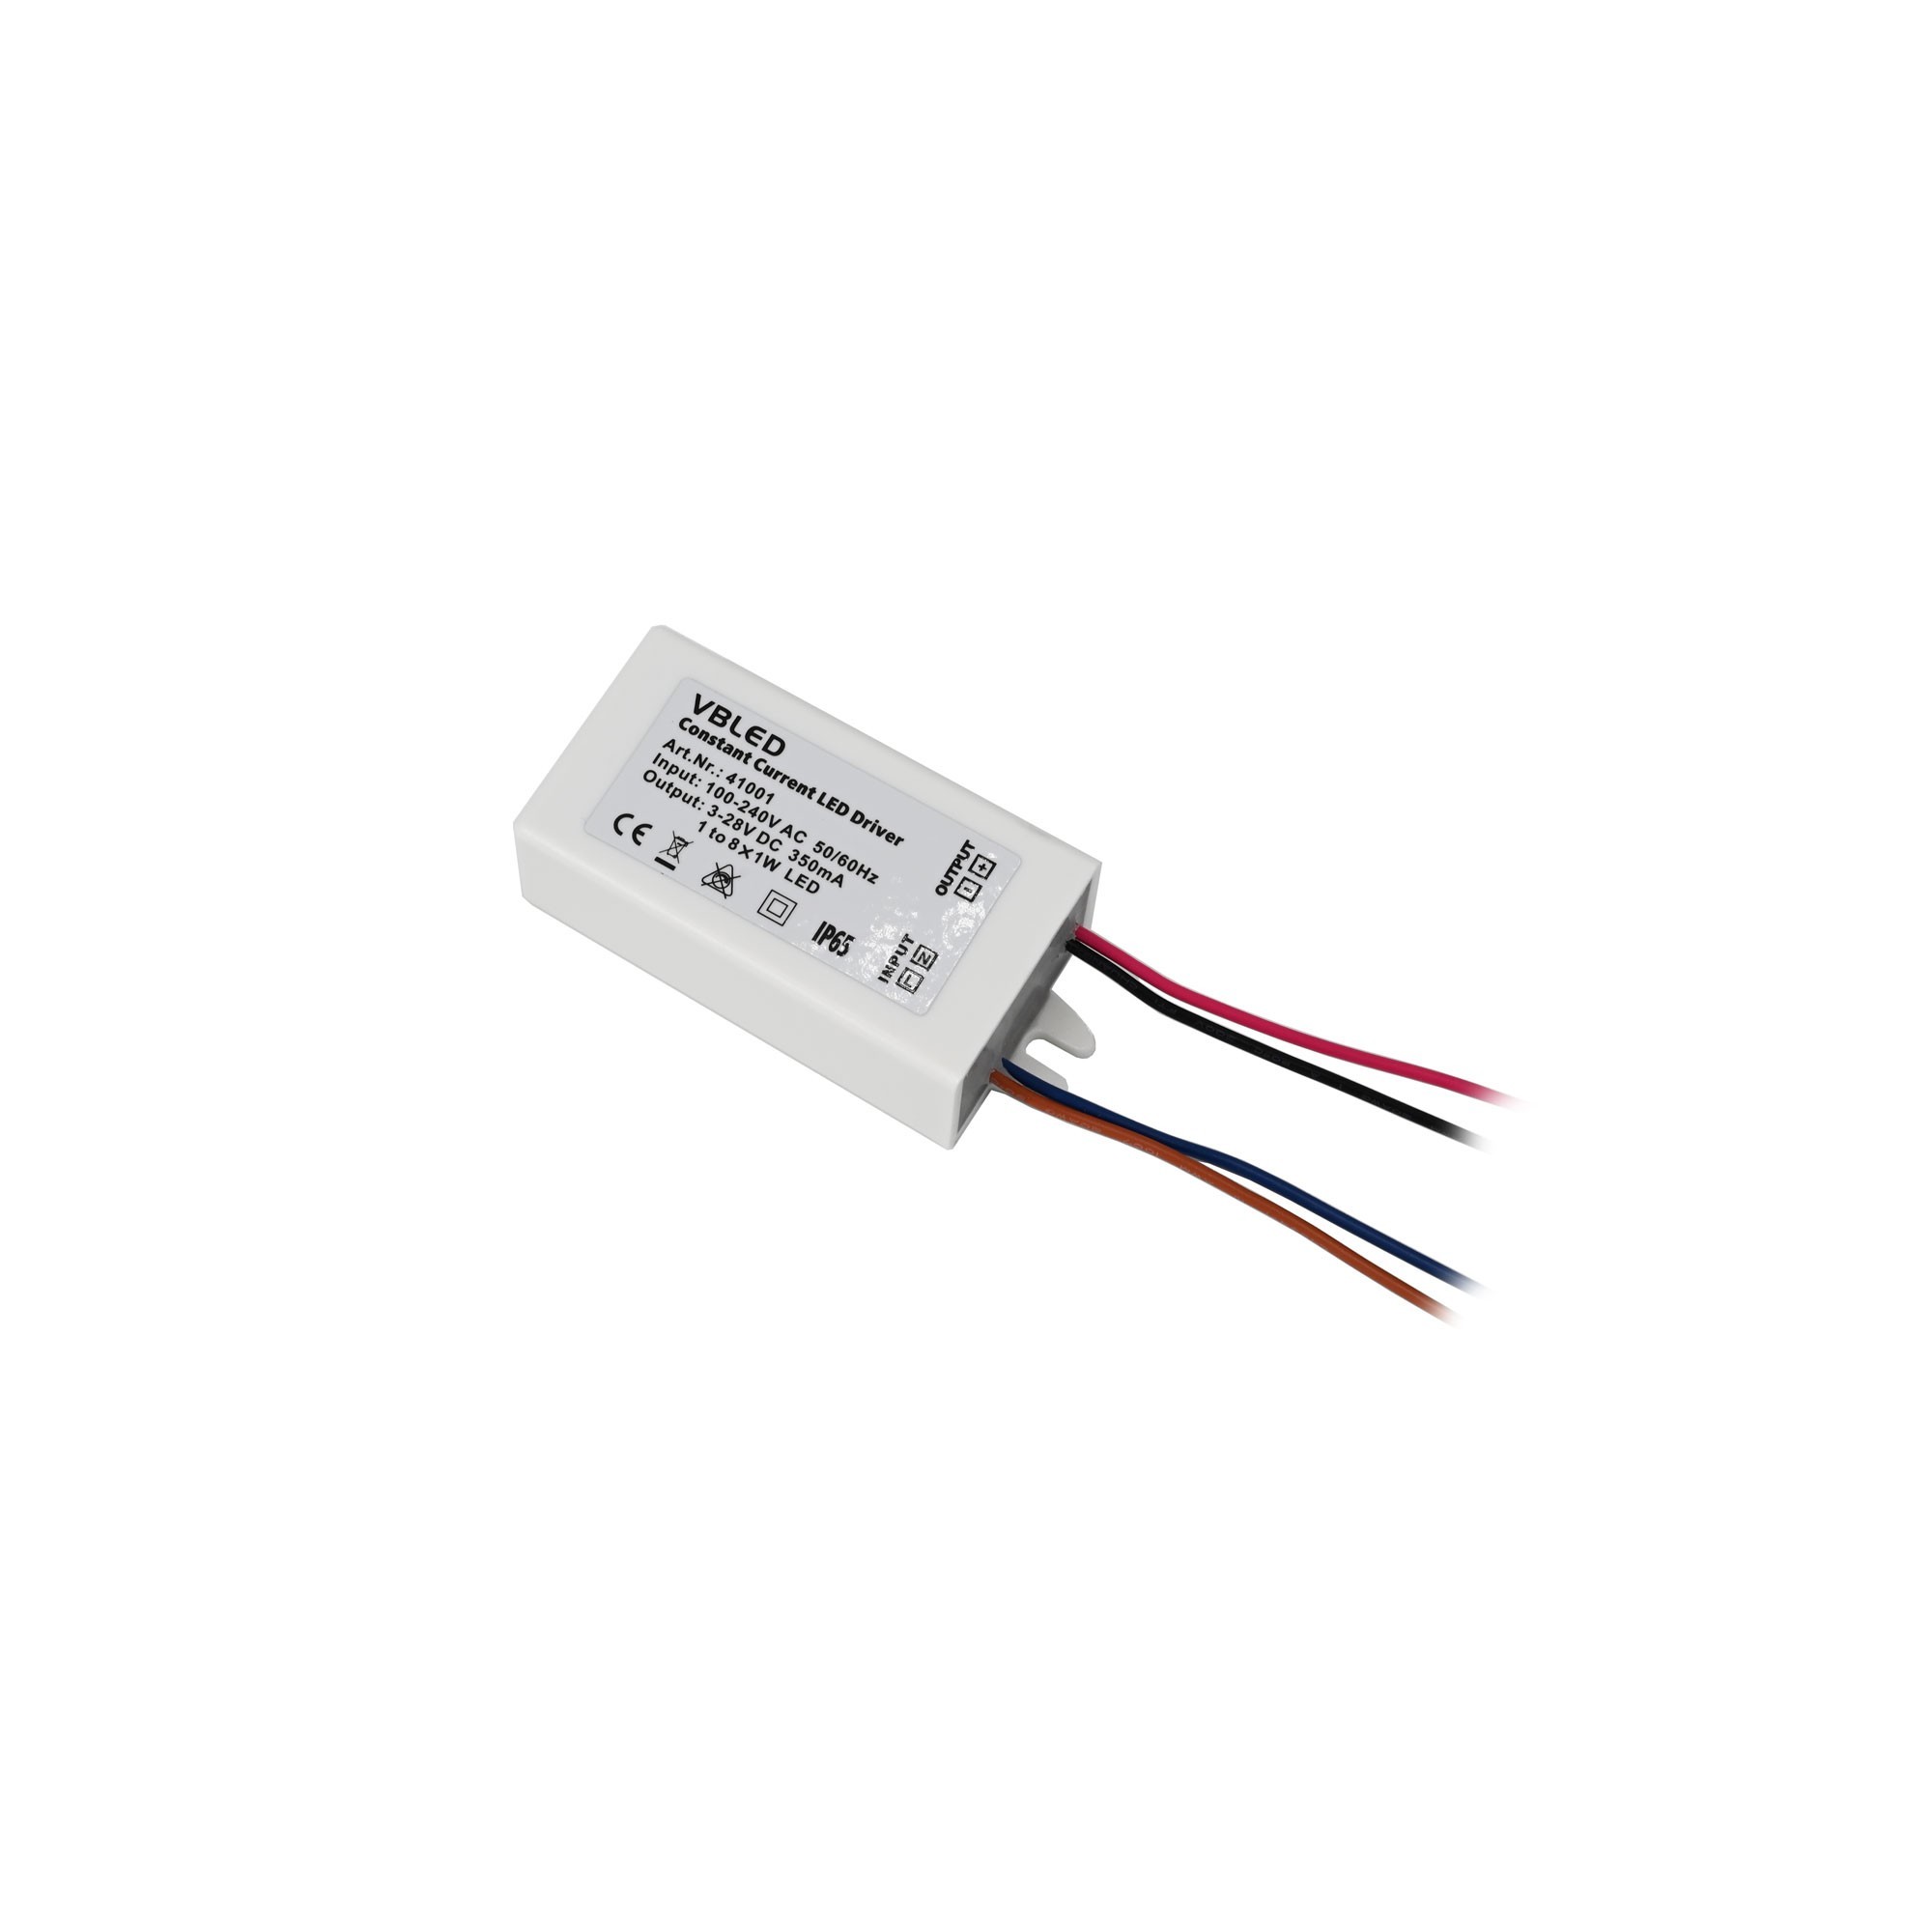 LED power supply unit constant current 3-32V DC / 350mA 10W IP65